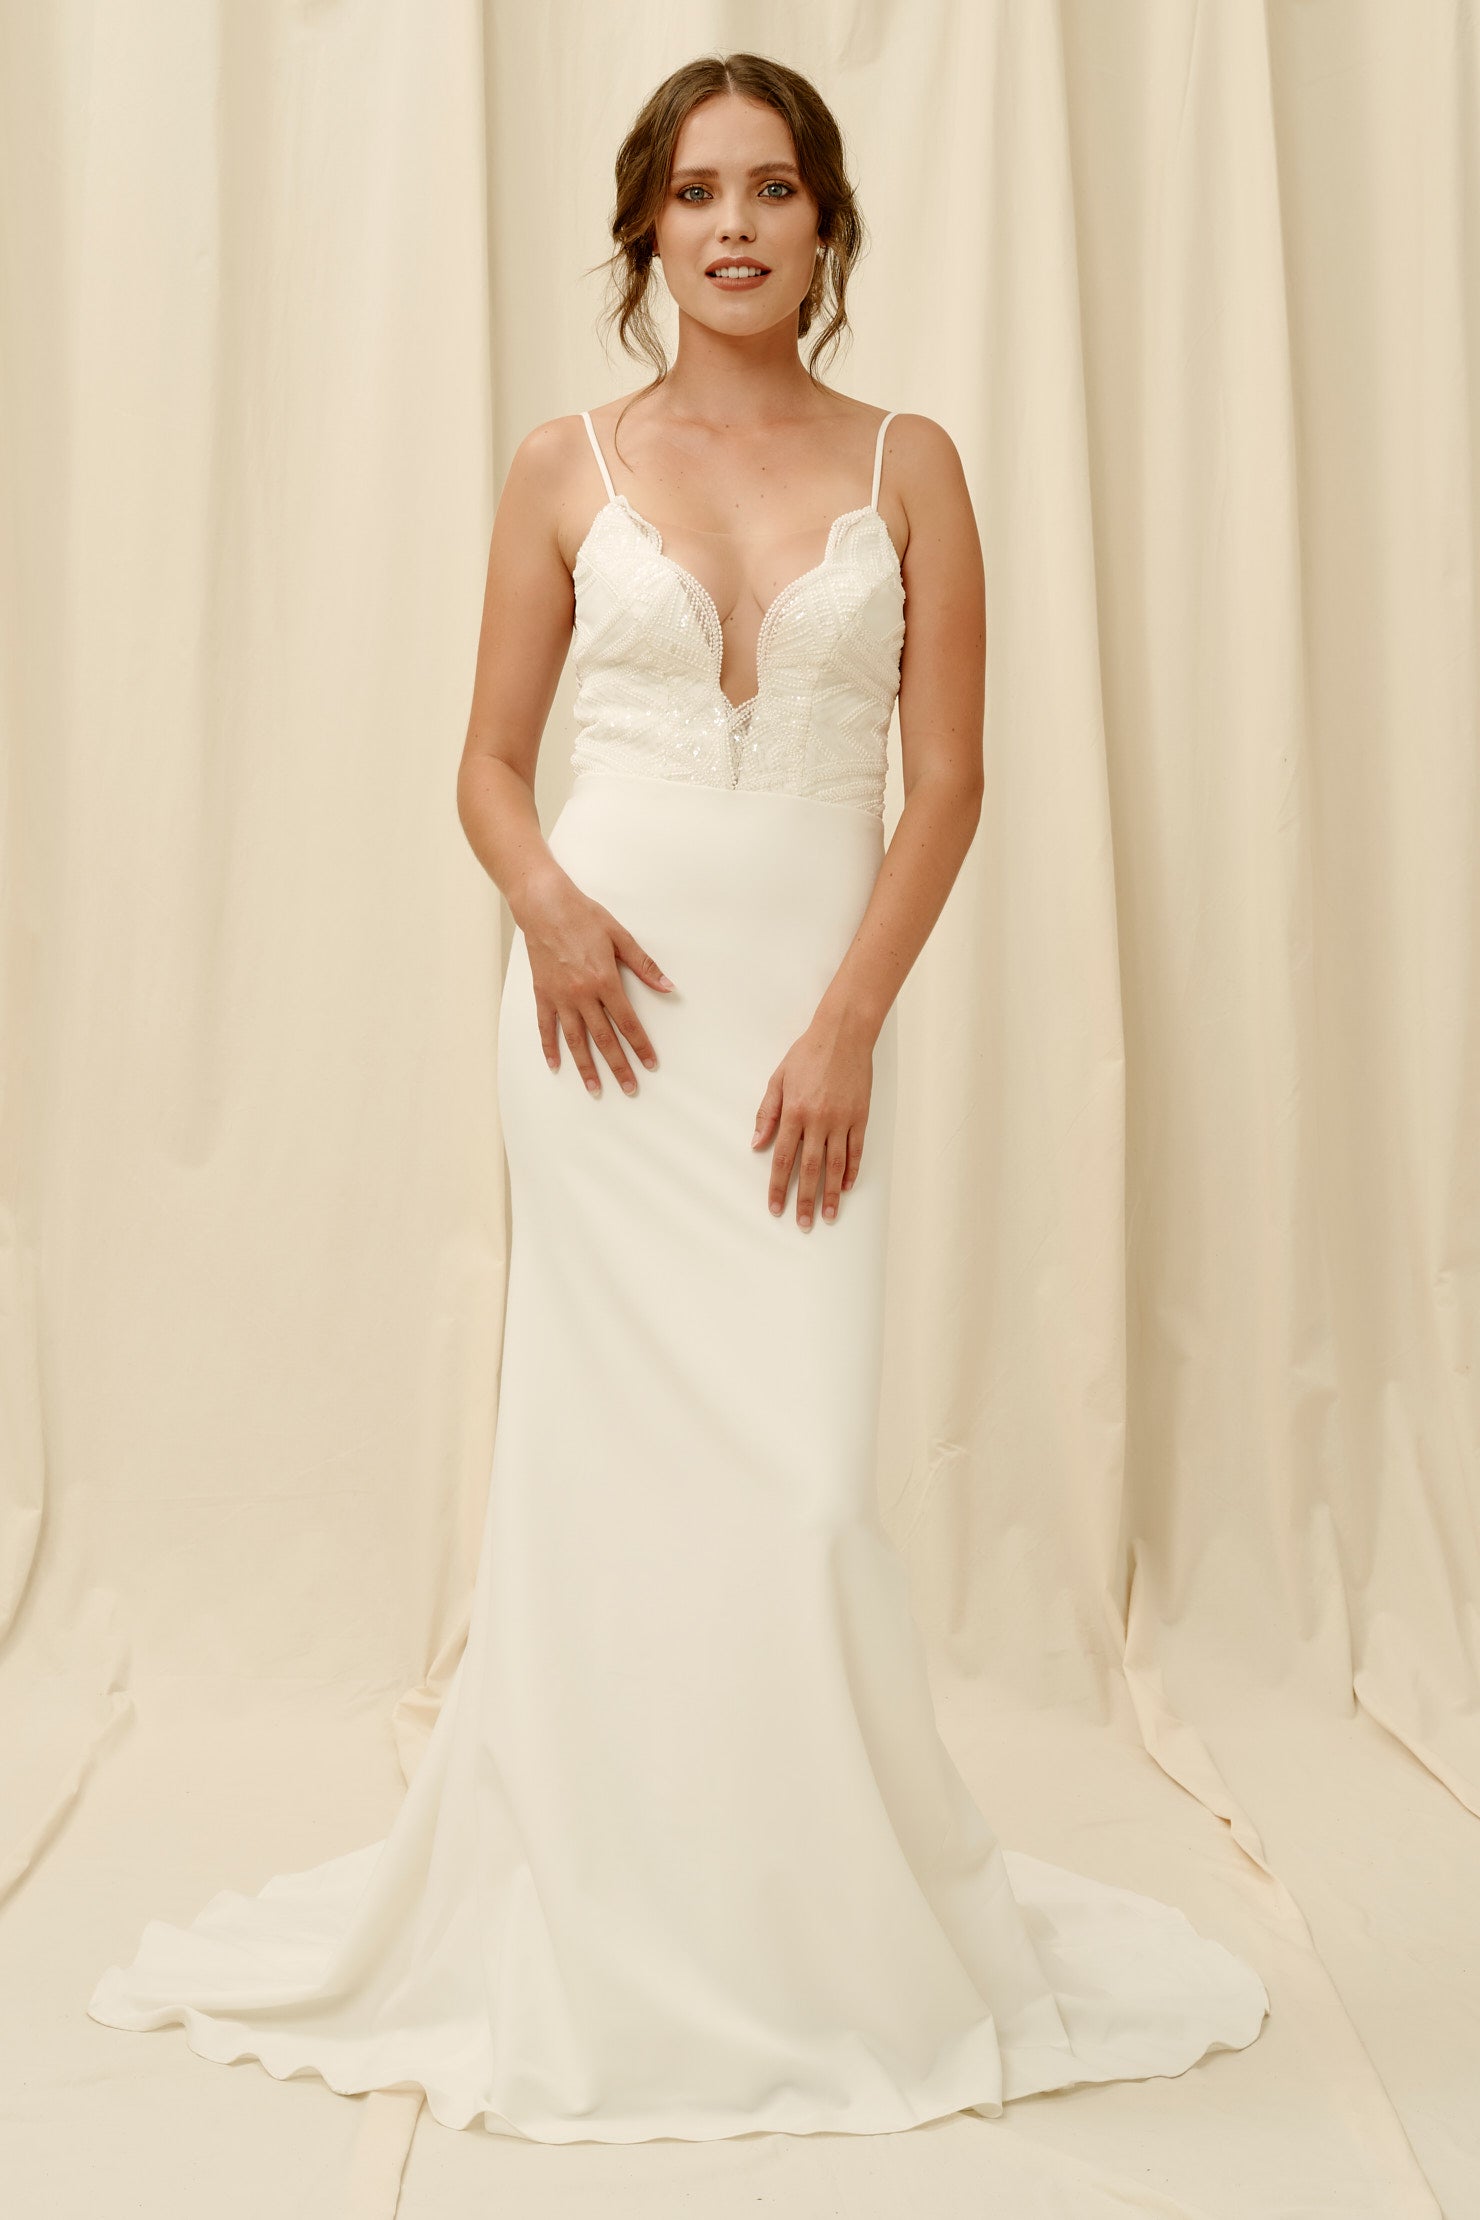 Fitted crepe wedding dress with a low neckline and spaghetti straps